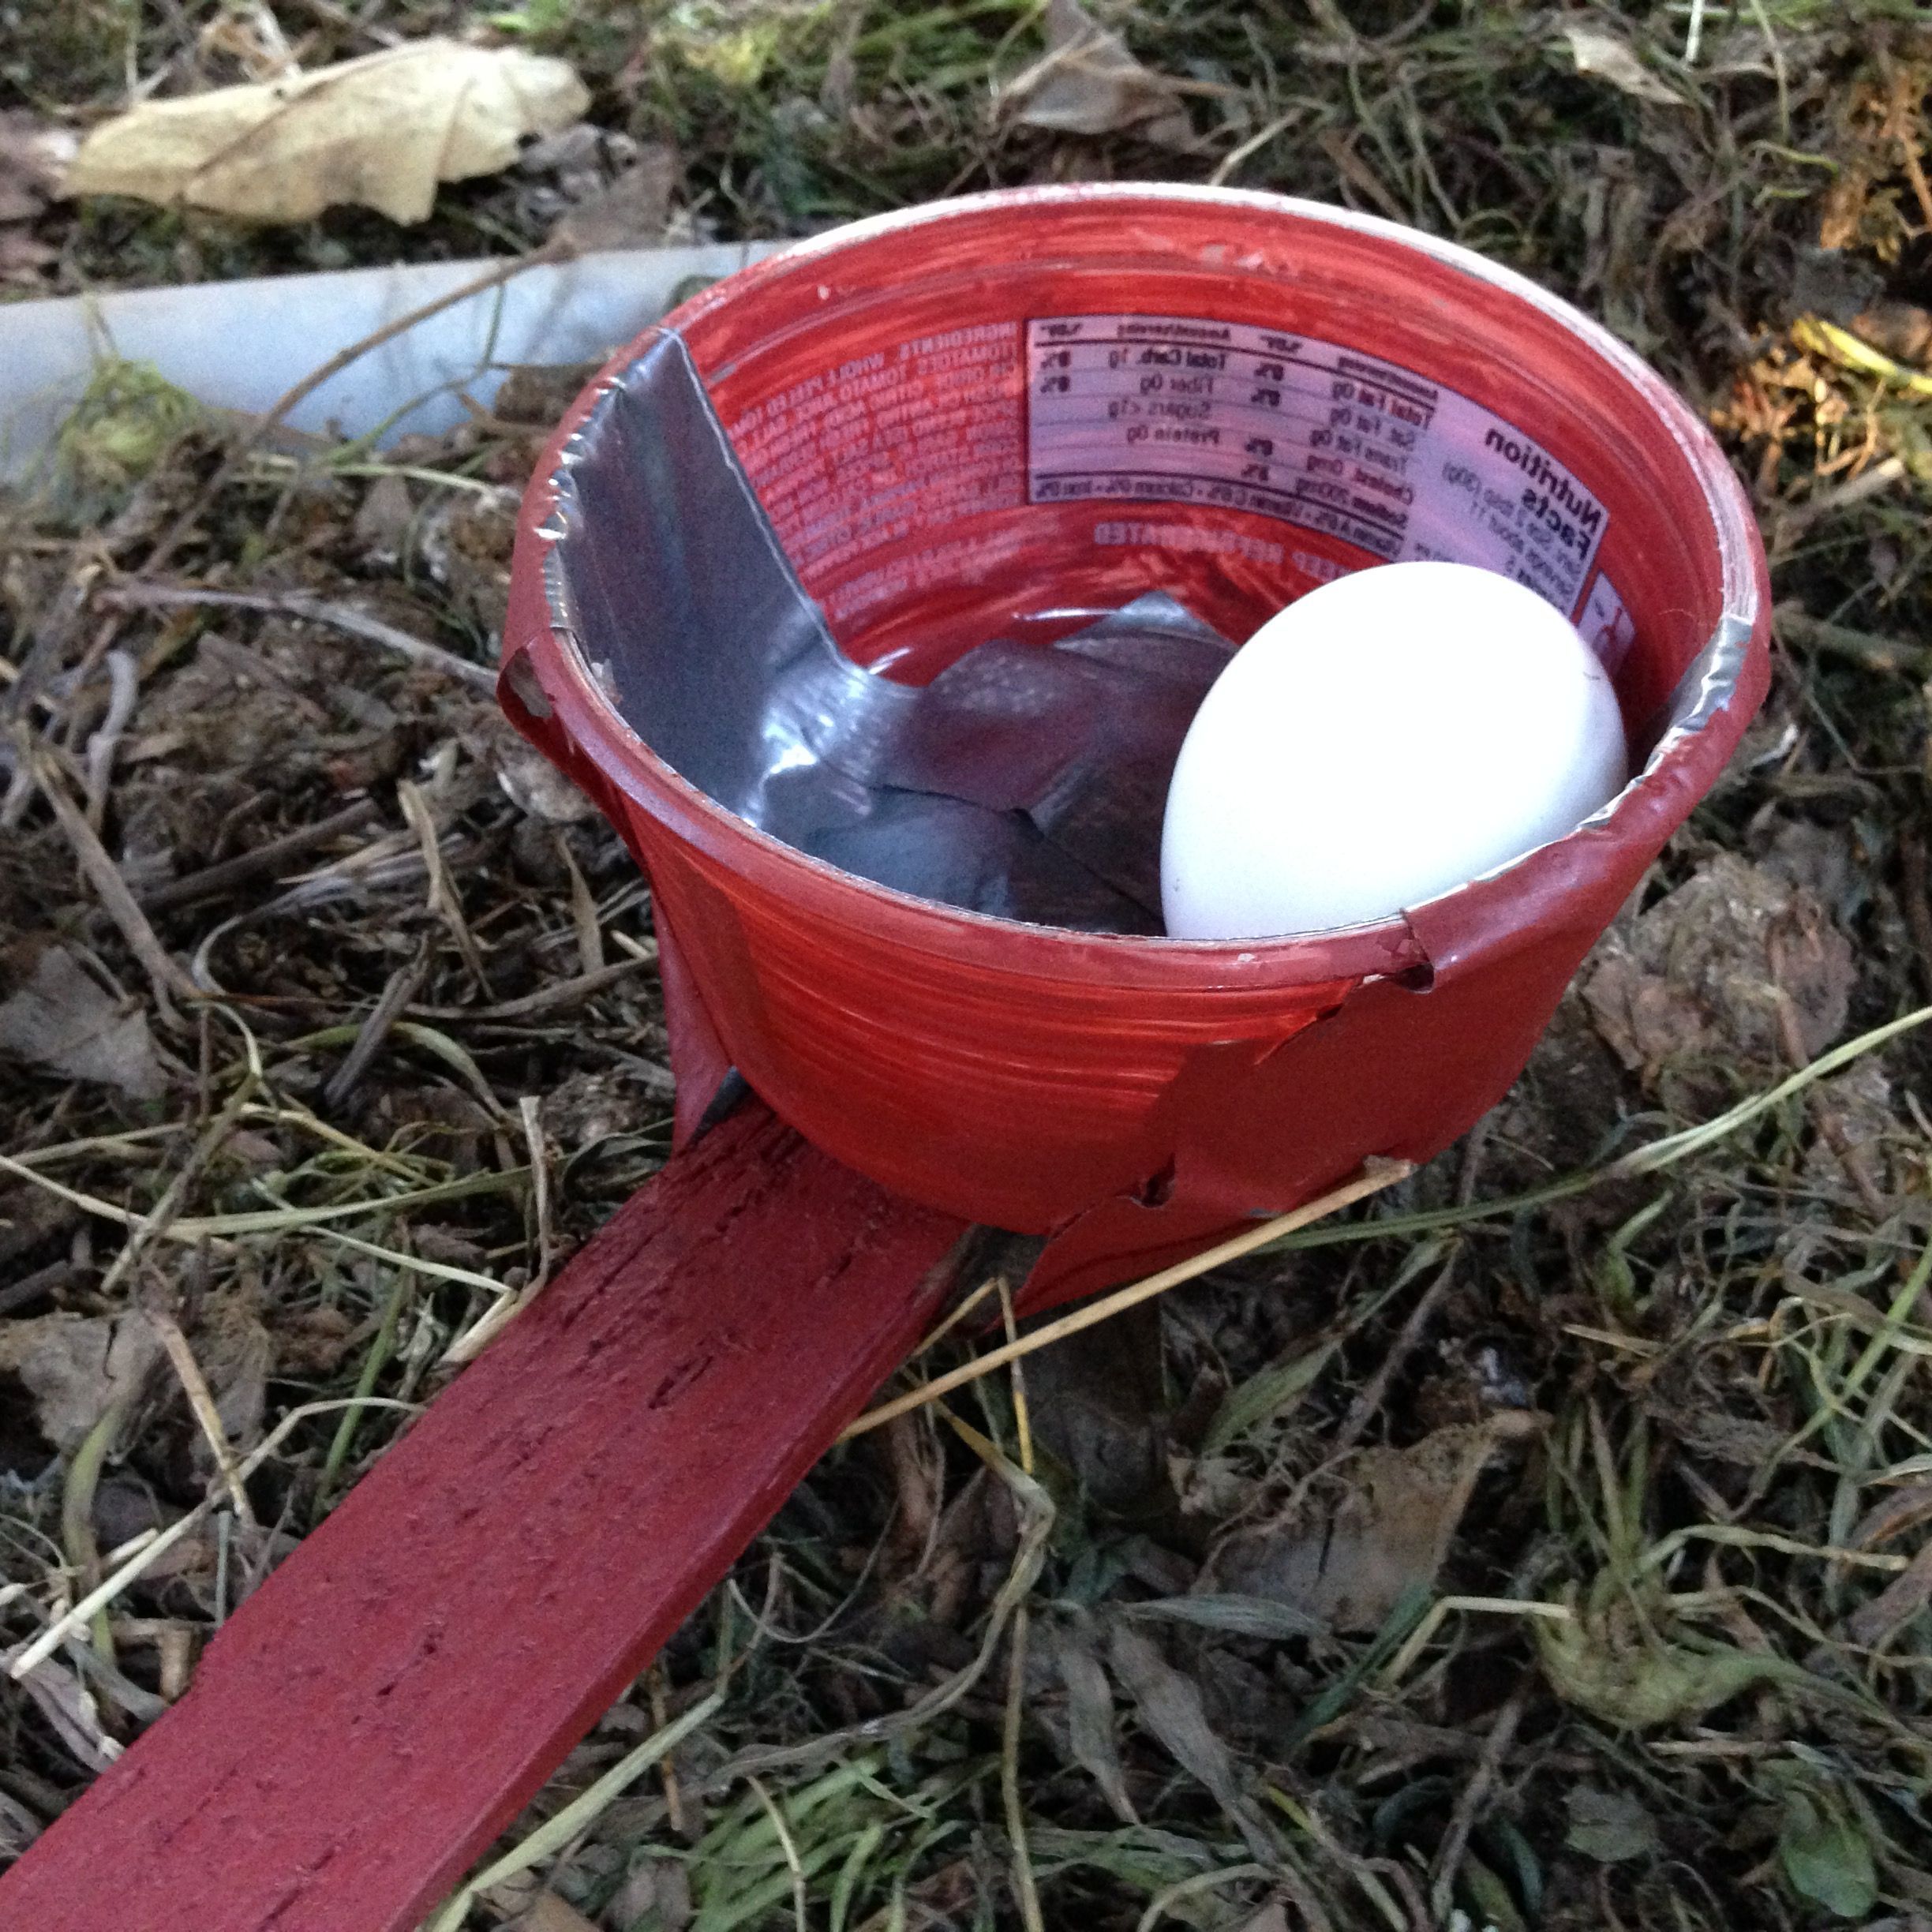 My McGyver tool for collecting eggs from the other side of the coop! Made from a leftover strip of wood and a plastic container, and some elegant duct tape. Barn red paint fixes everything.